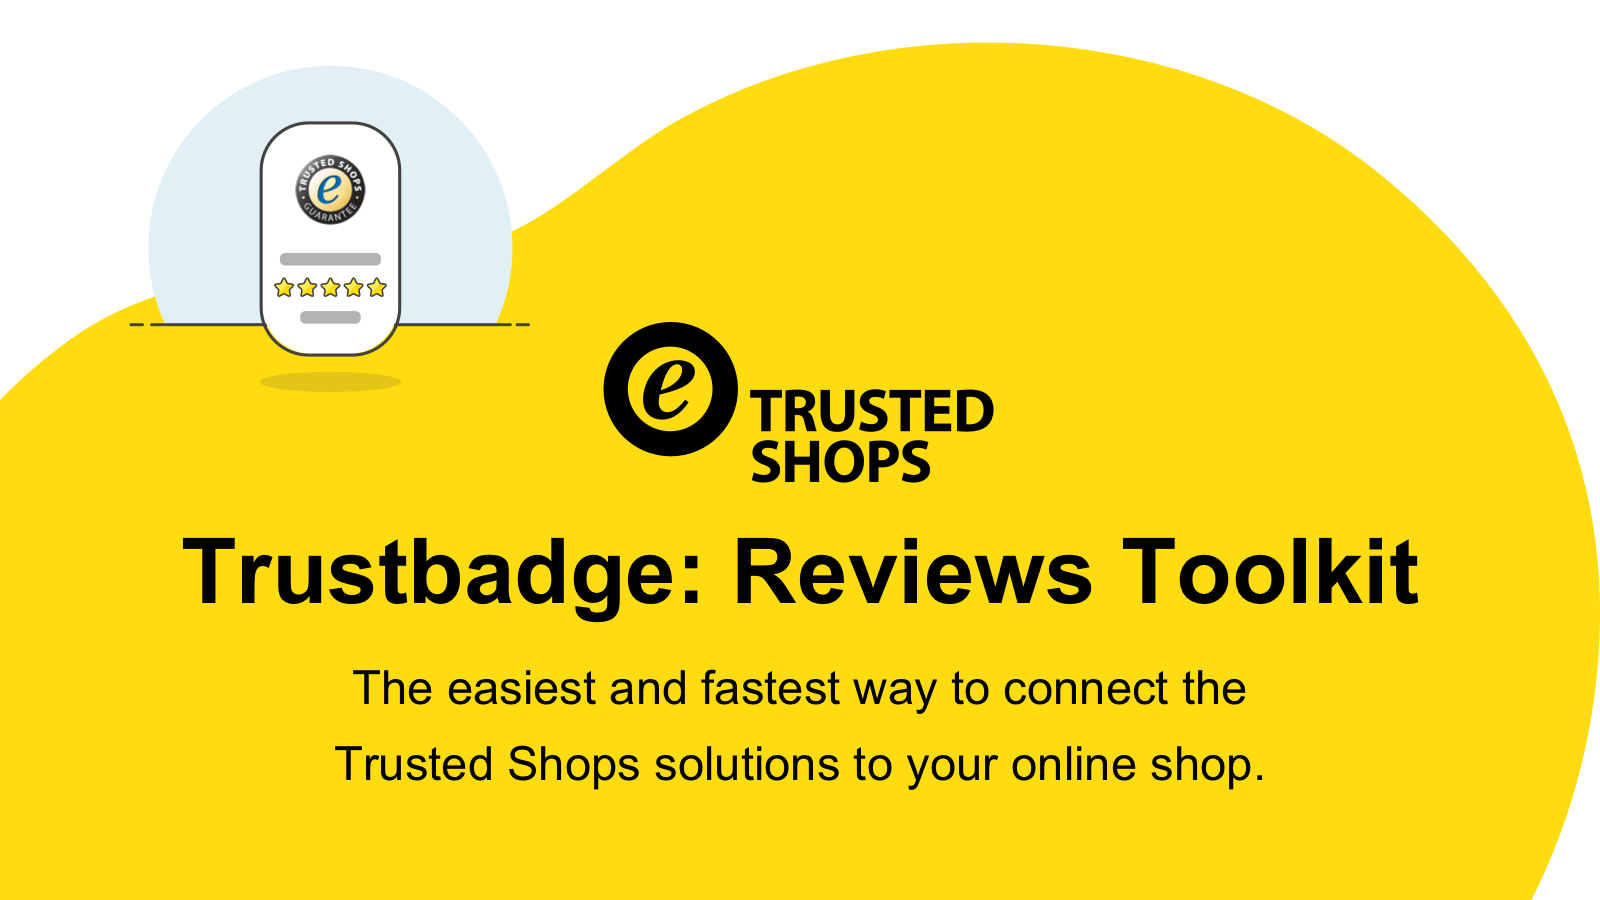 Trustbadge: Reviews Toolkit